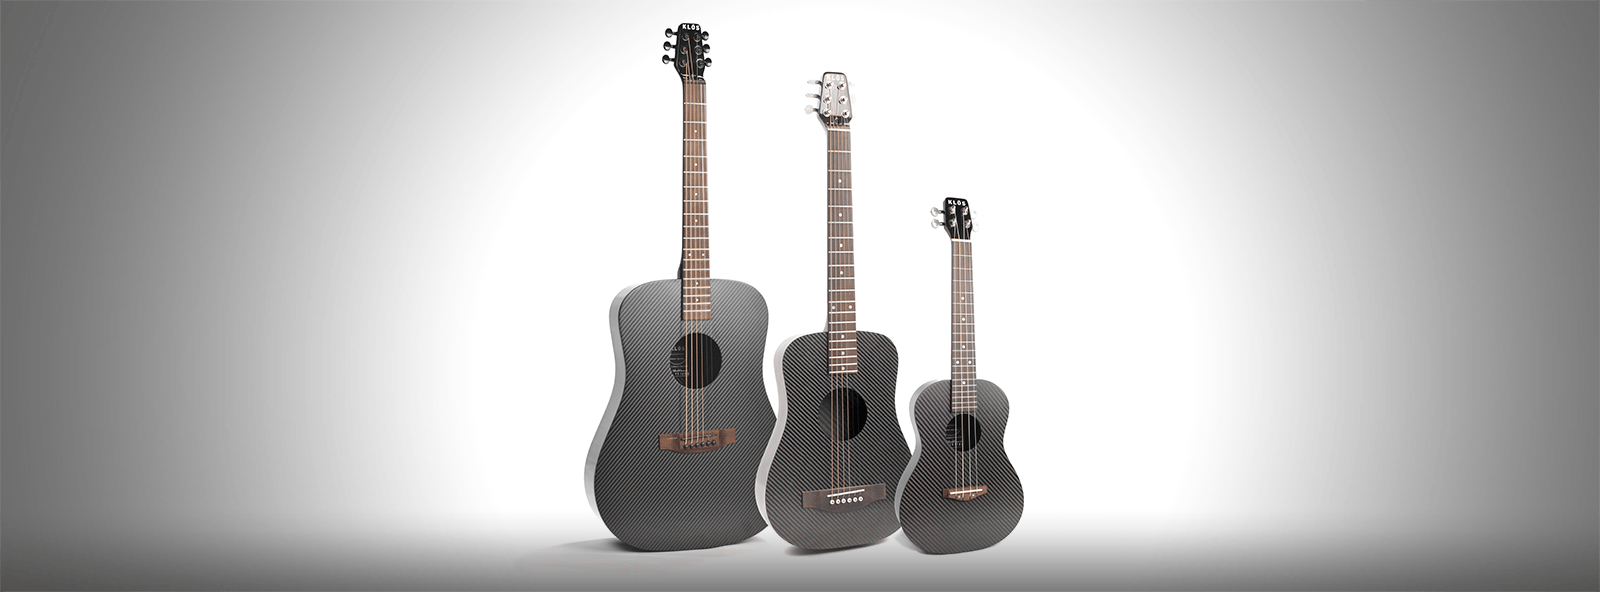 how-we-invented-a-carbon-fiber-guitar-and-grew-to-1m-year